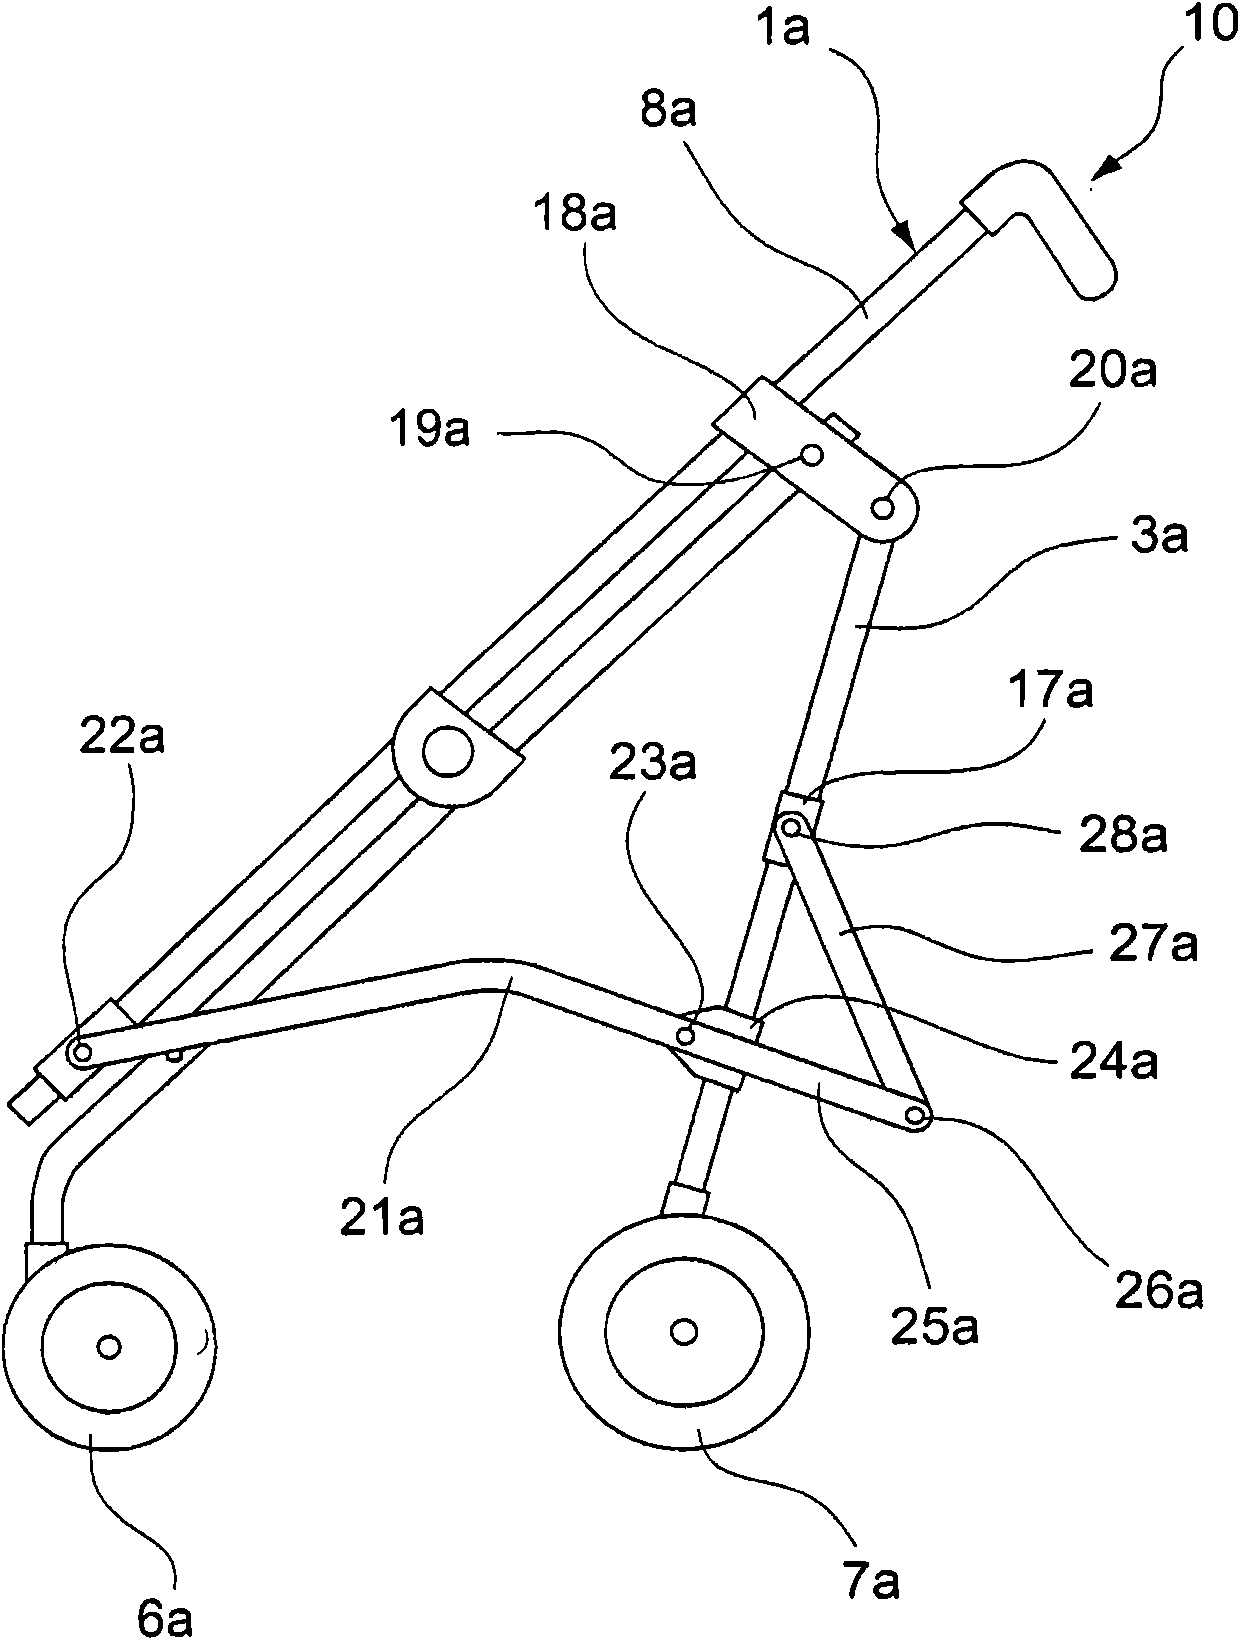 Chassis of a pushchair with two folded positions, and corresponding pushchair